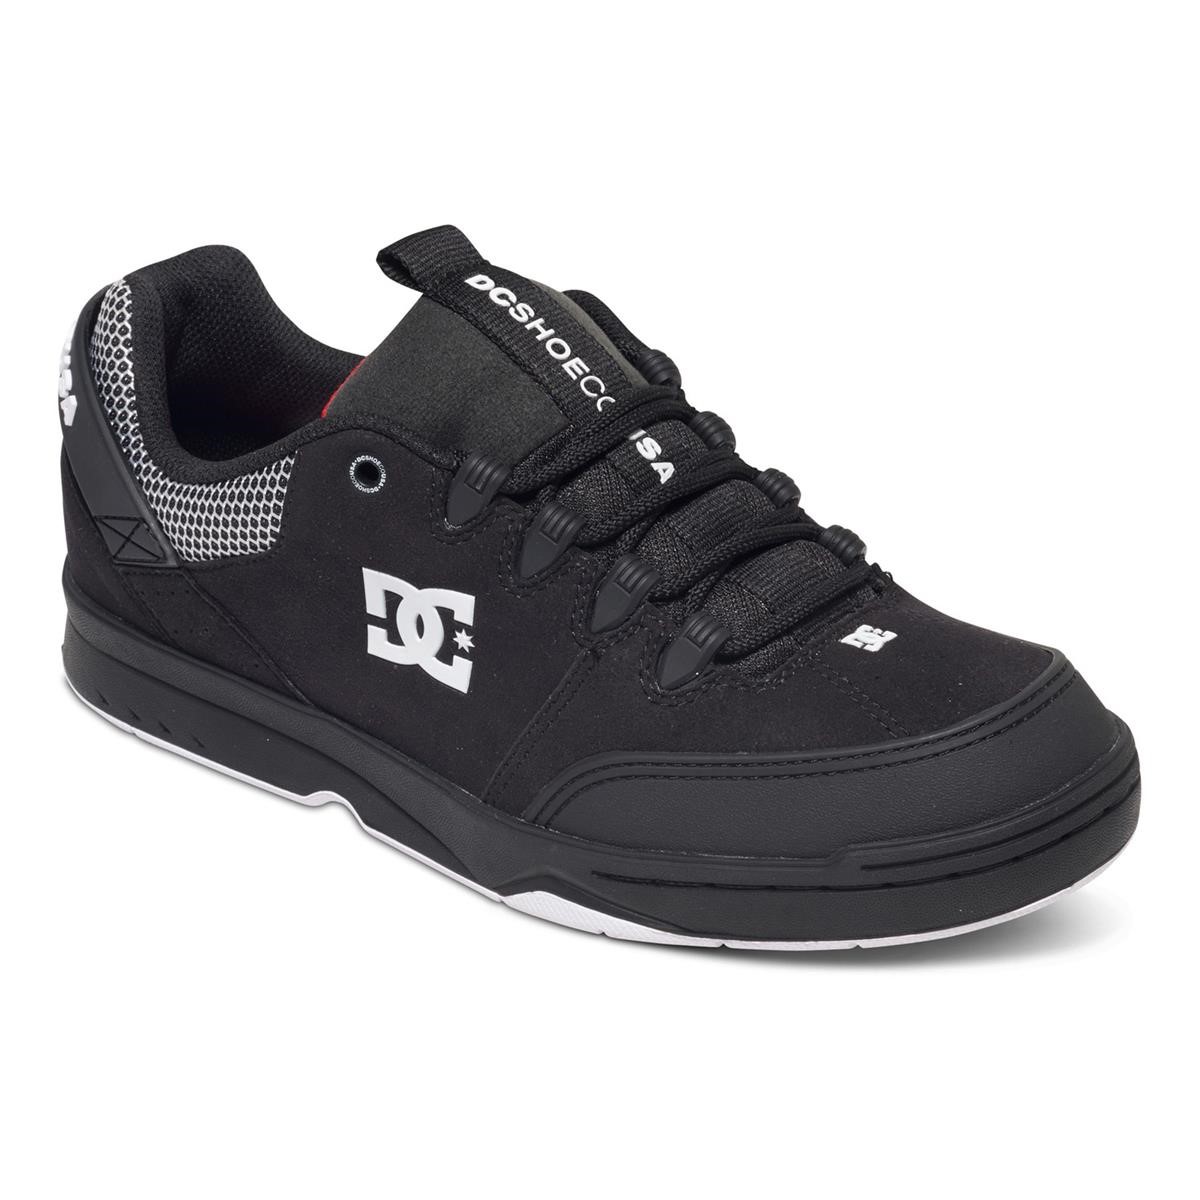 DC Shoes Syntax SN Black/White/Red